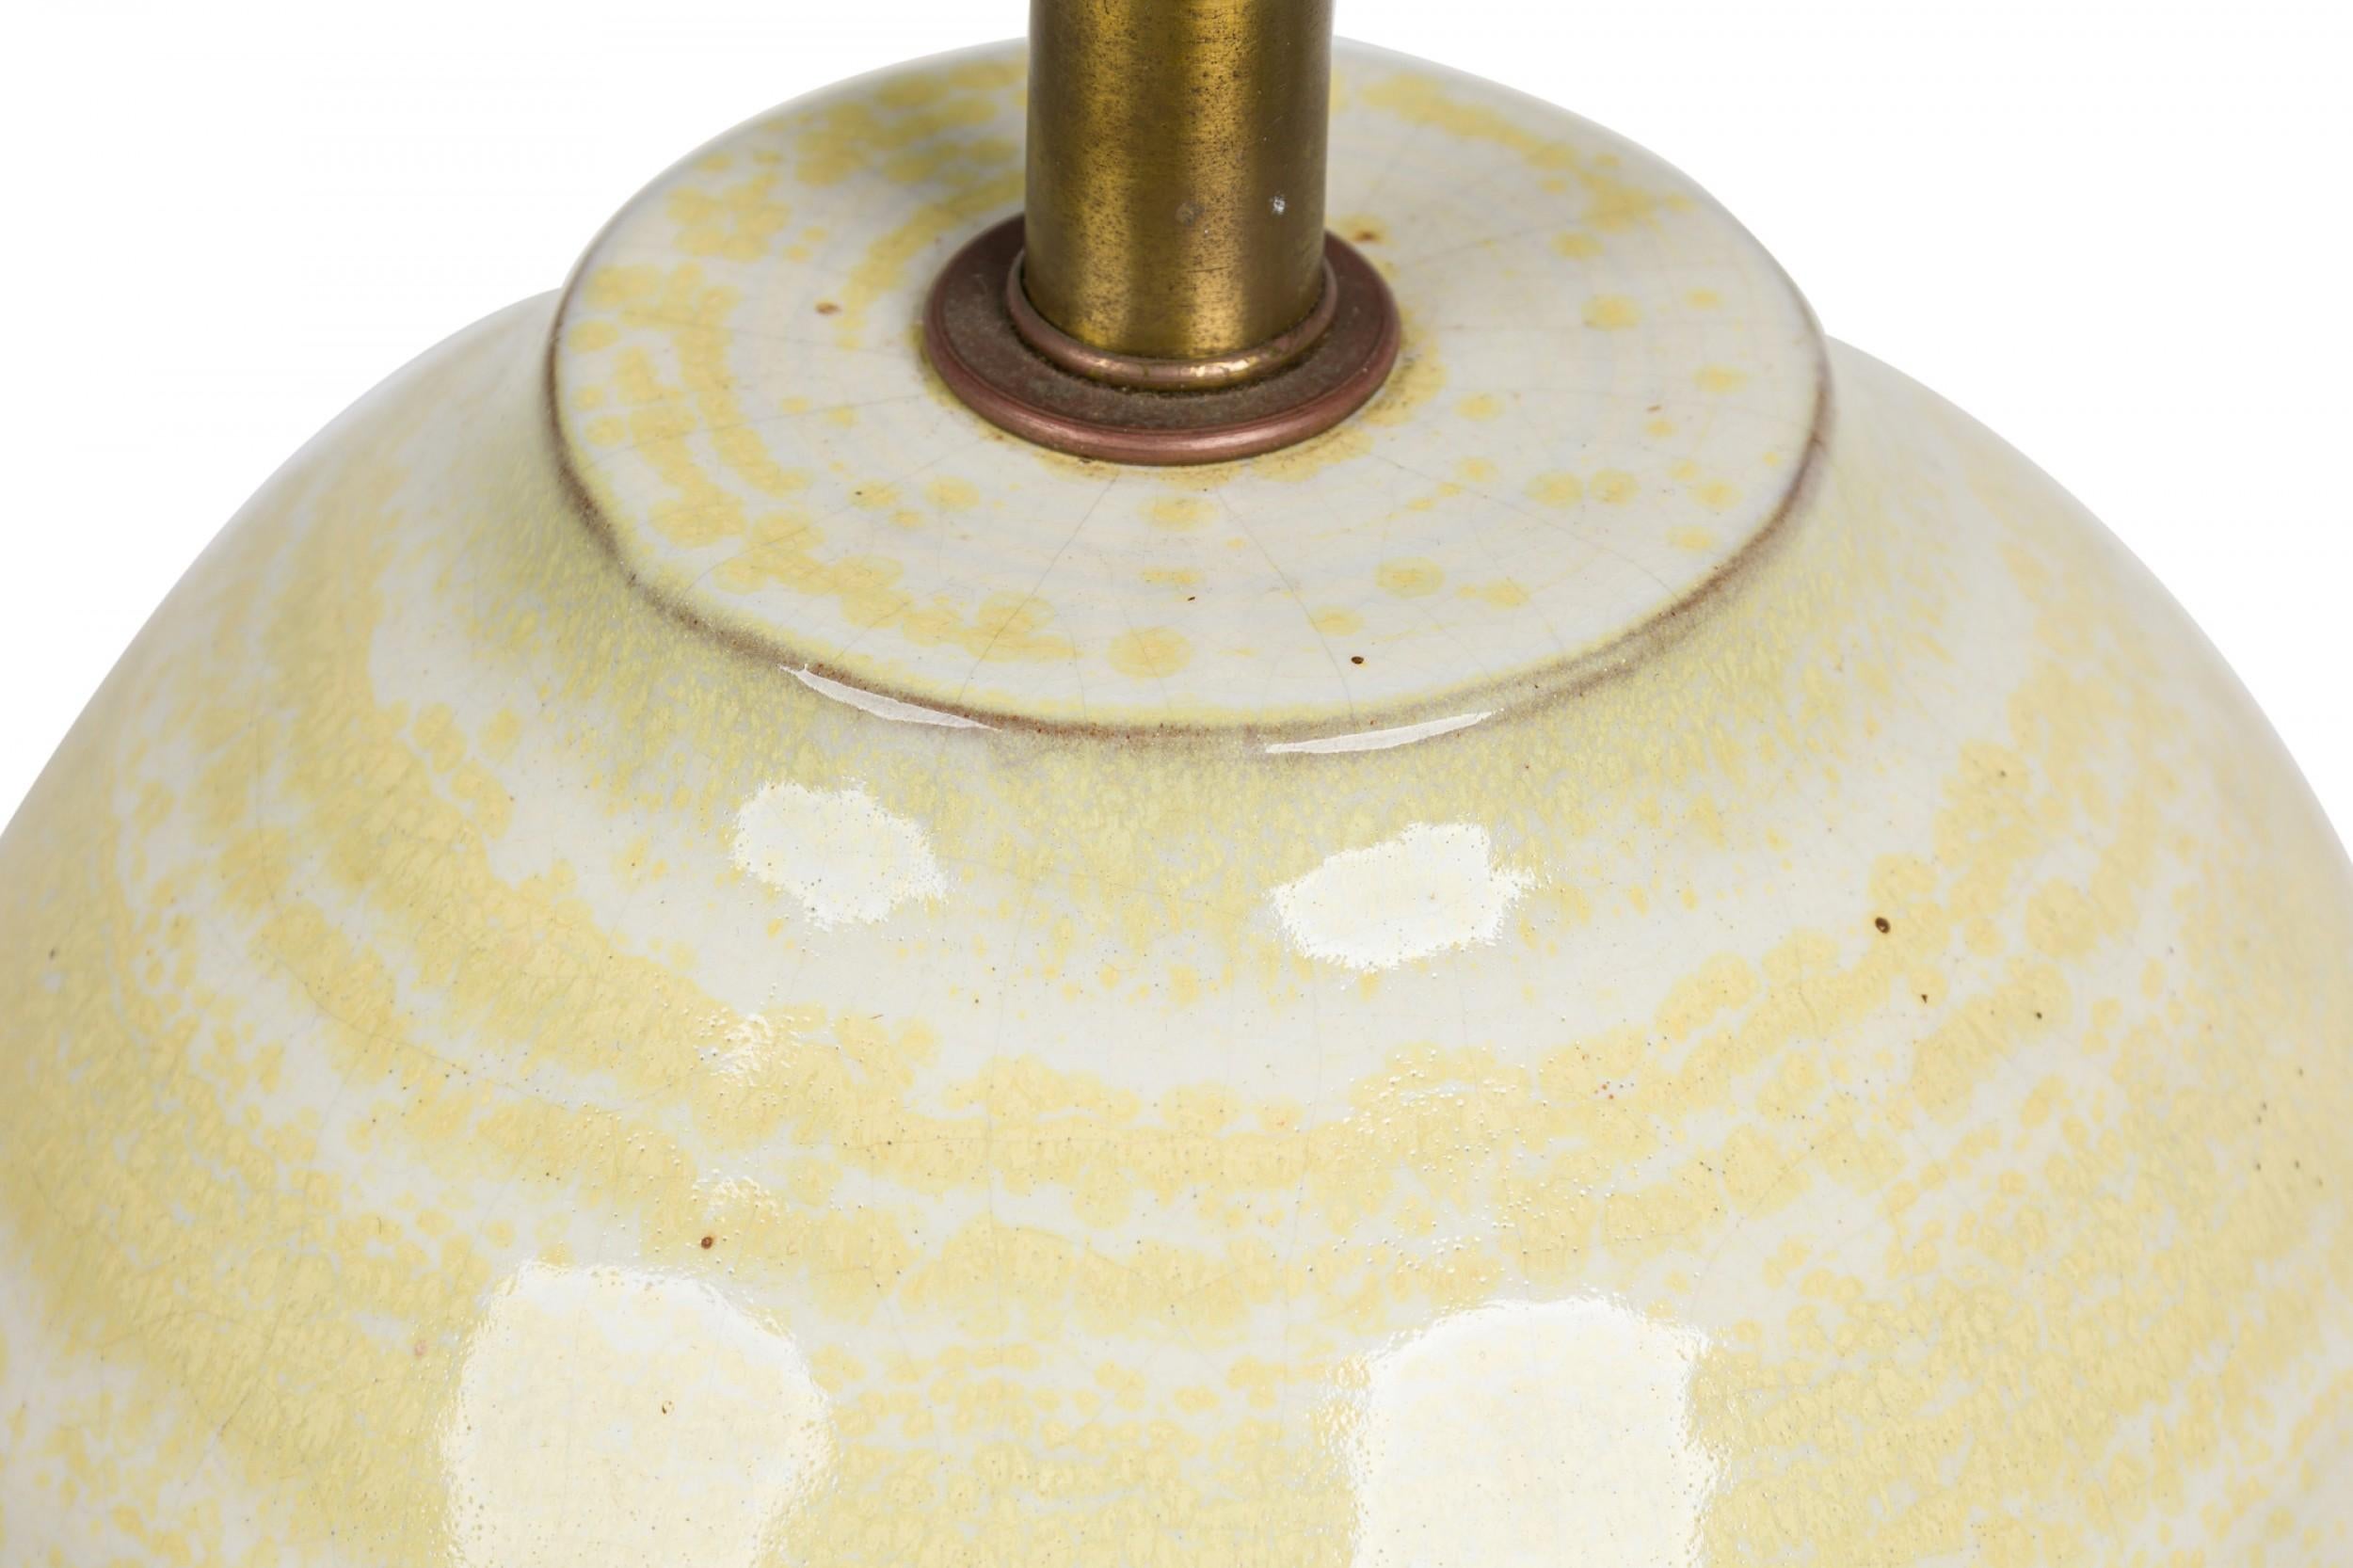 Mid-Century American ceramic table lamp in flared ovoid form with flattened top and embedded brass stem, harp and functional light switch socket, the body hand painted in textured canary yellow concentric rings peeking through the glossy, buttery